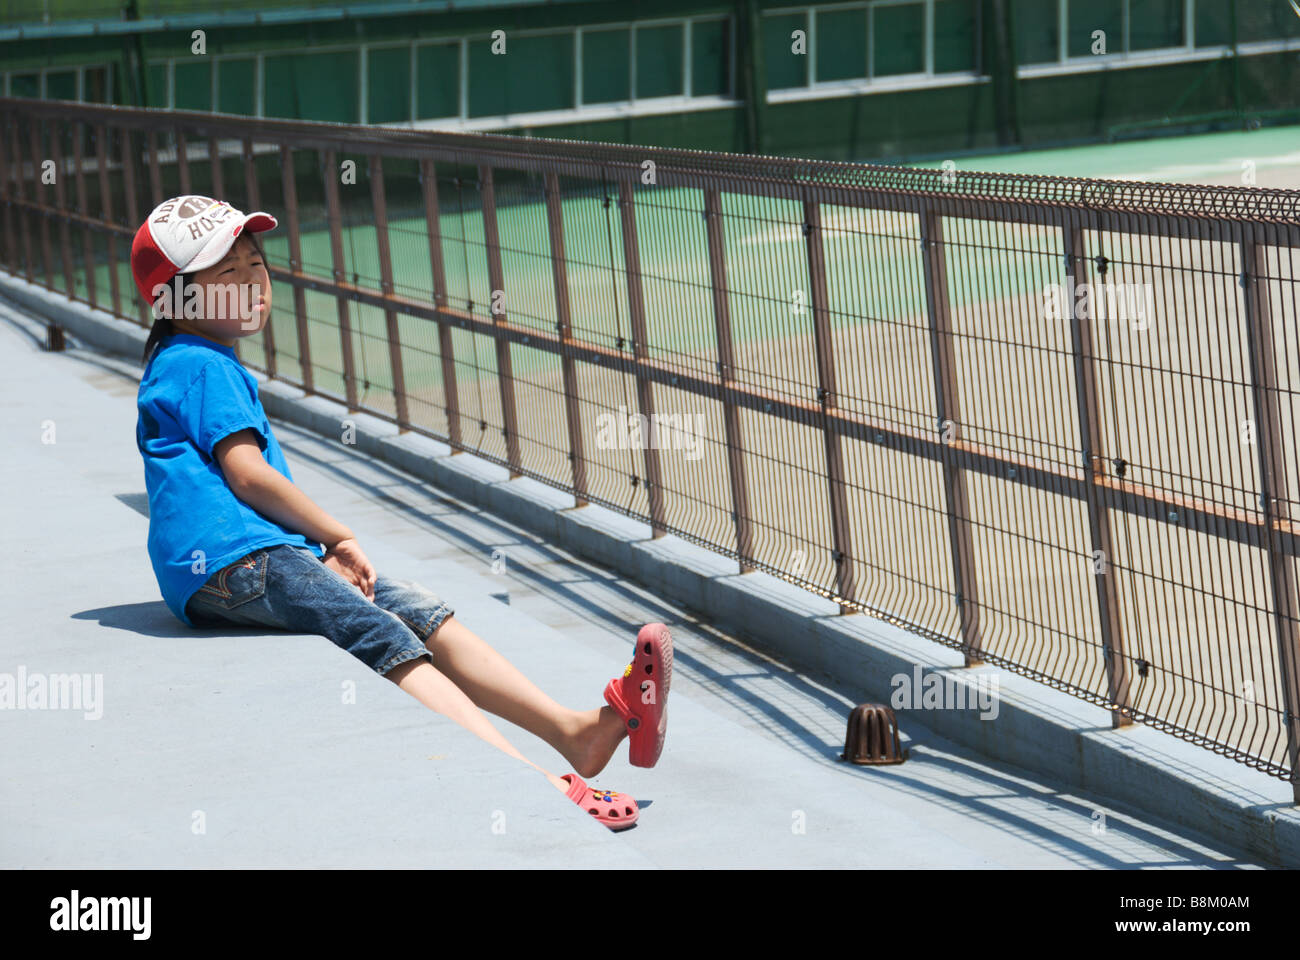 A Japanese girl swings her legs in the grandstands at a small town baseball stadium, Shimosuwa Stock Photo